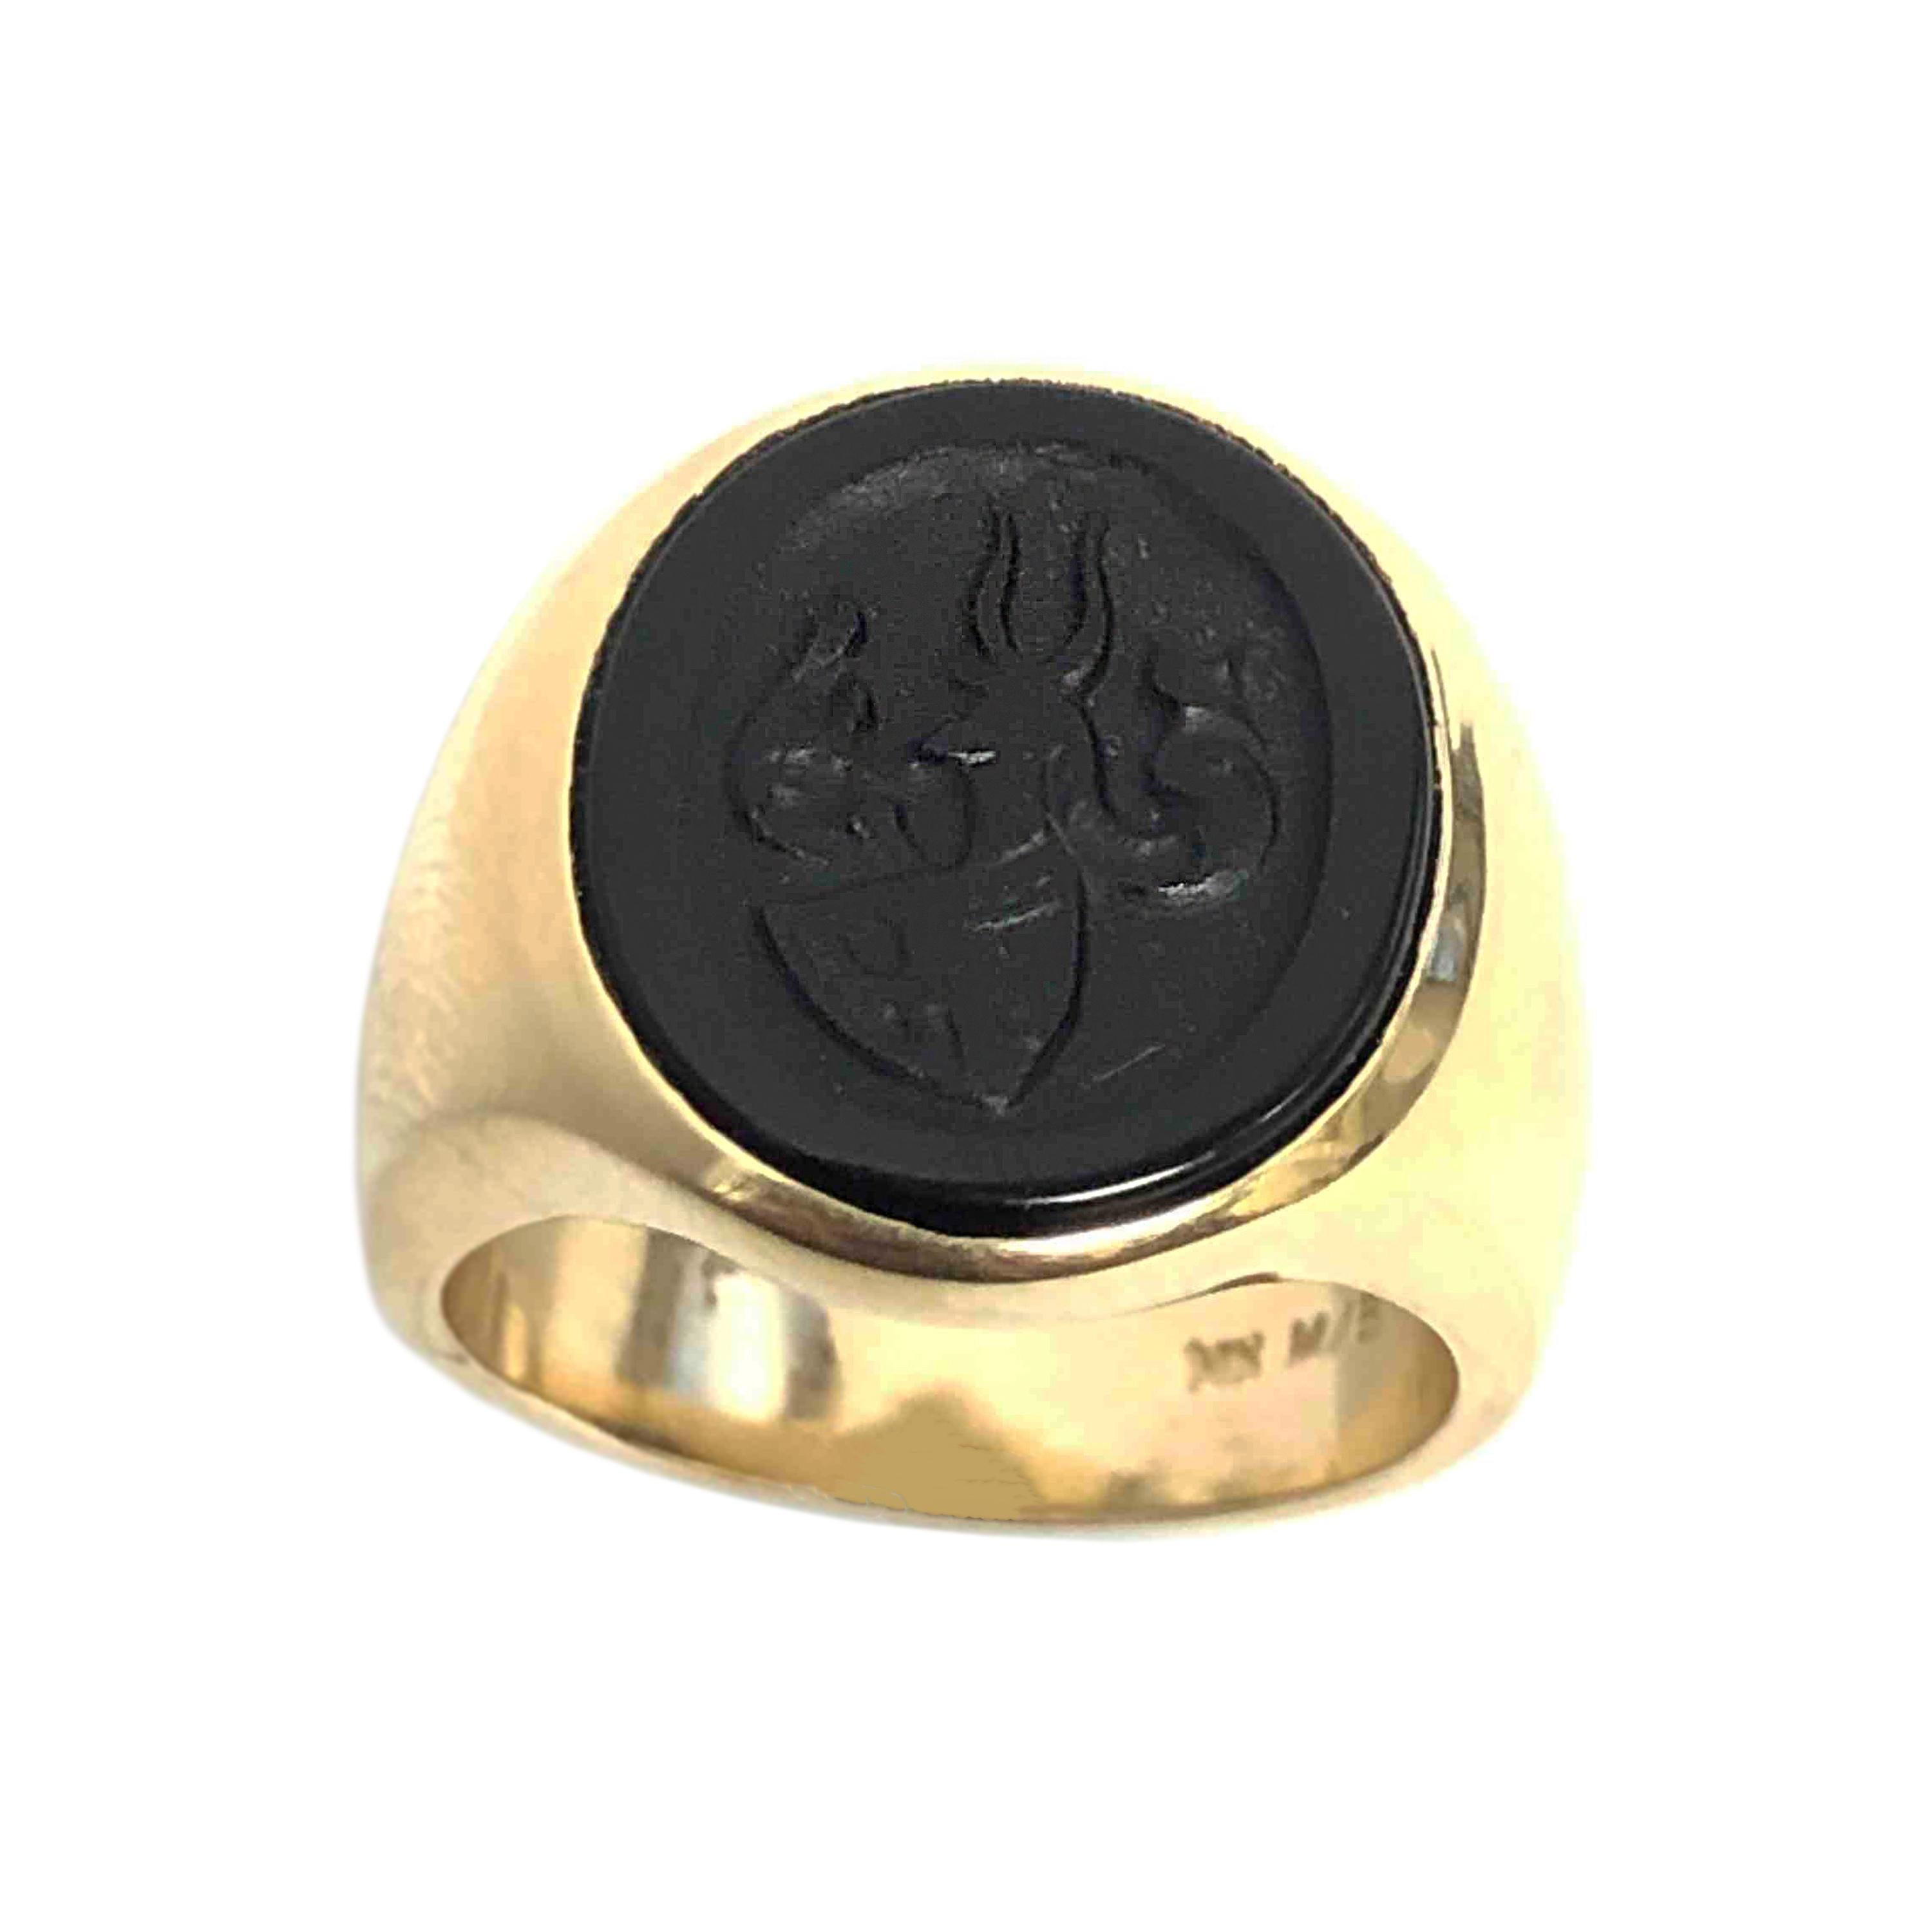 Circa 1930s Gents 14K Yellow Gold Signet Ring. Centrally set with an Oval Onyx measuring 5/8 X 1/2 inch and having a deep carving with a Shield and winged Insignia Crest. Finger size 6 1/2. 